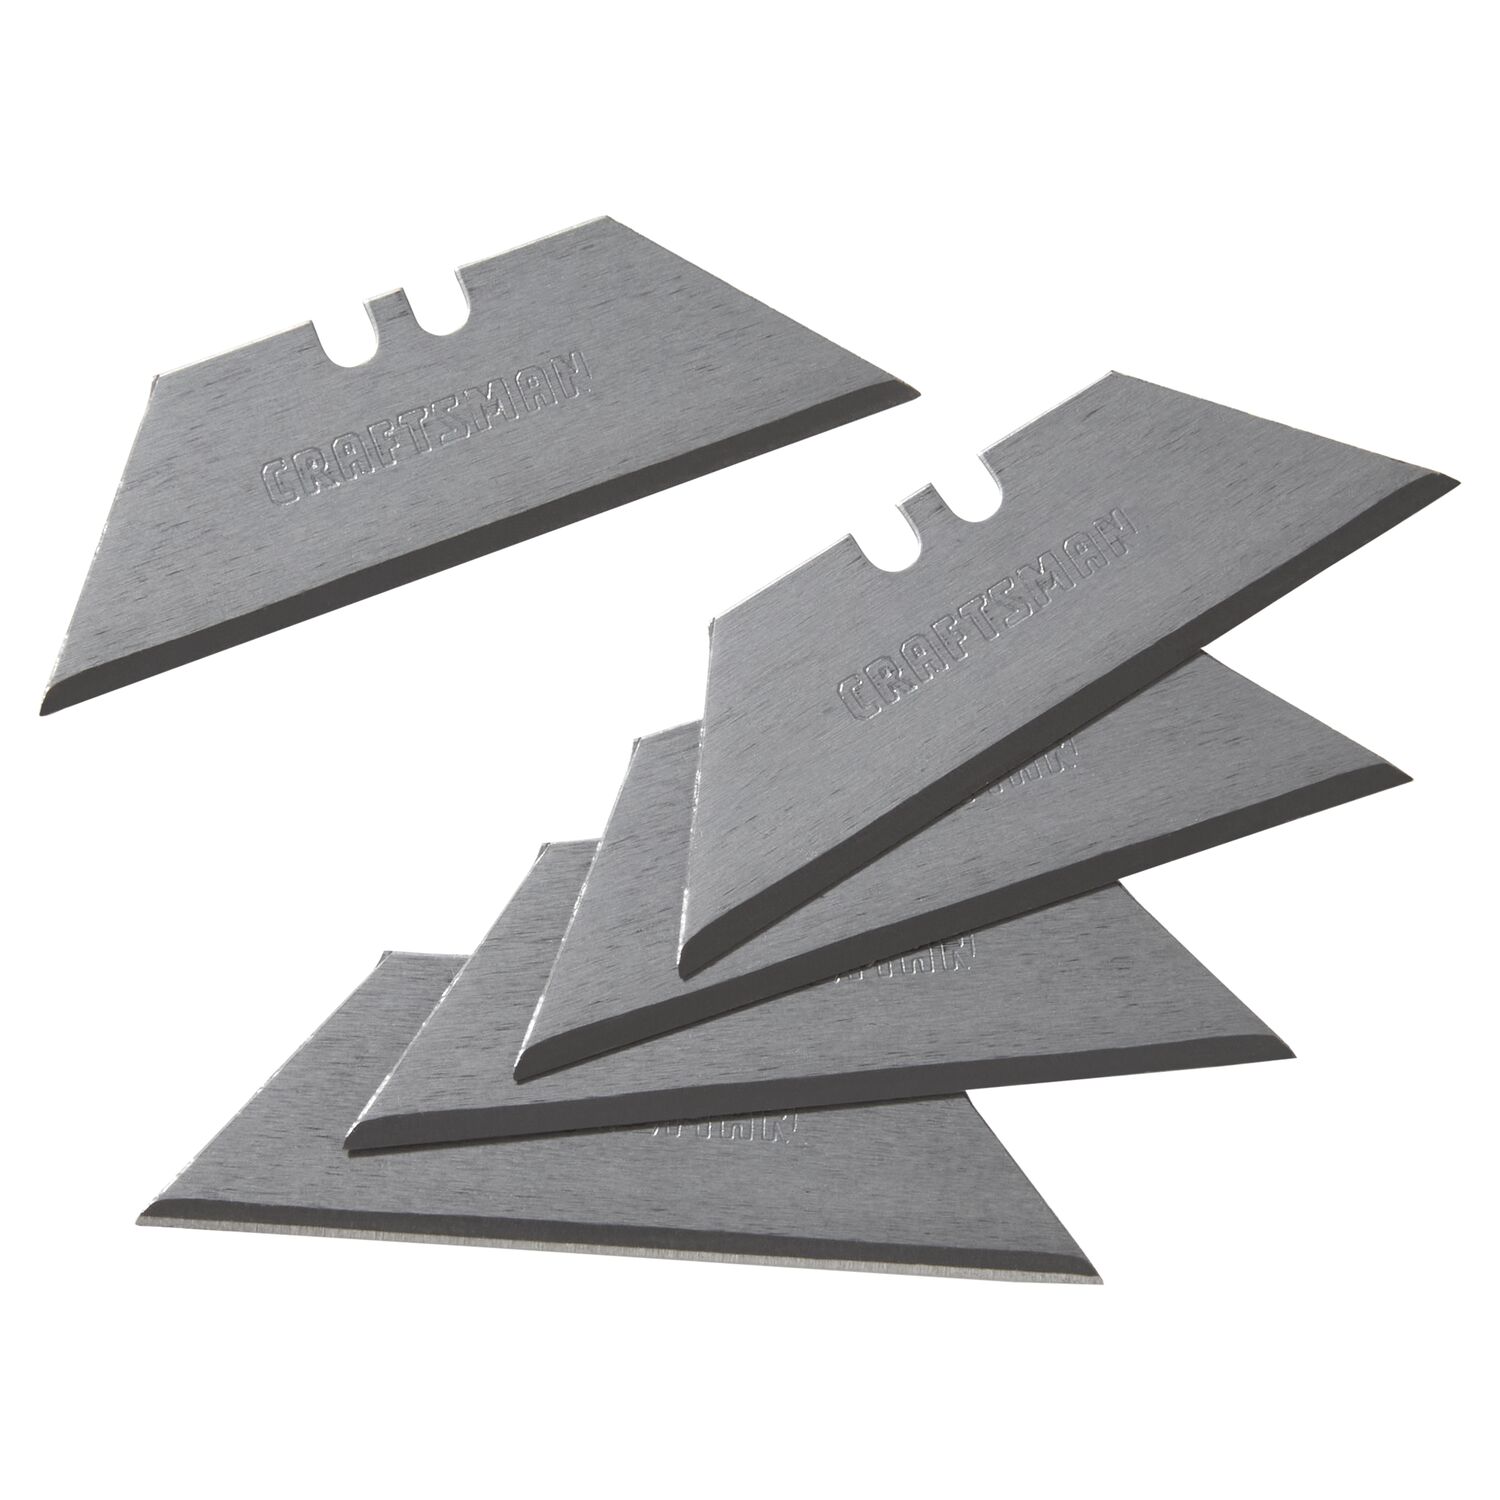 Staples Replacement Blades For Box Cutter Gray 100/Pack (17551/66